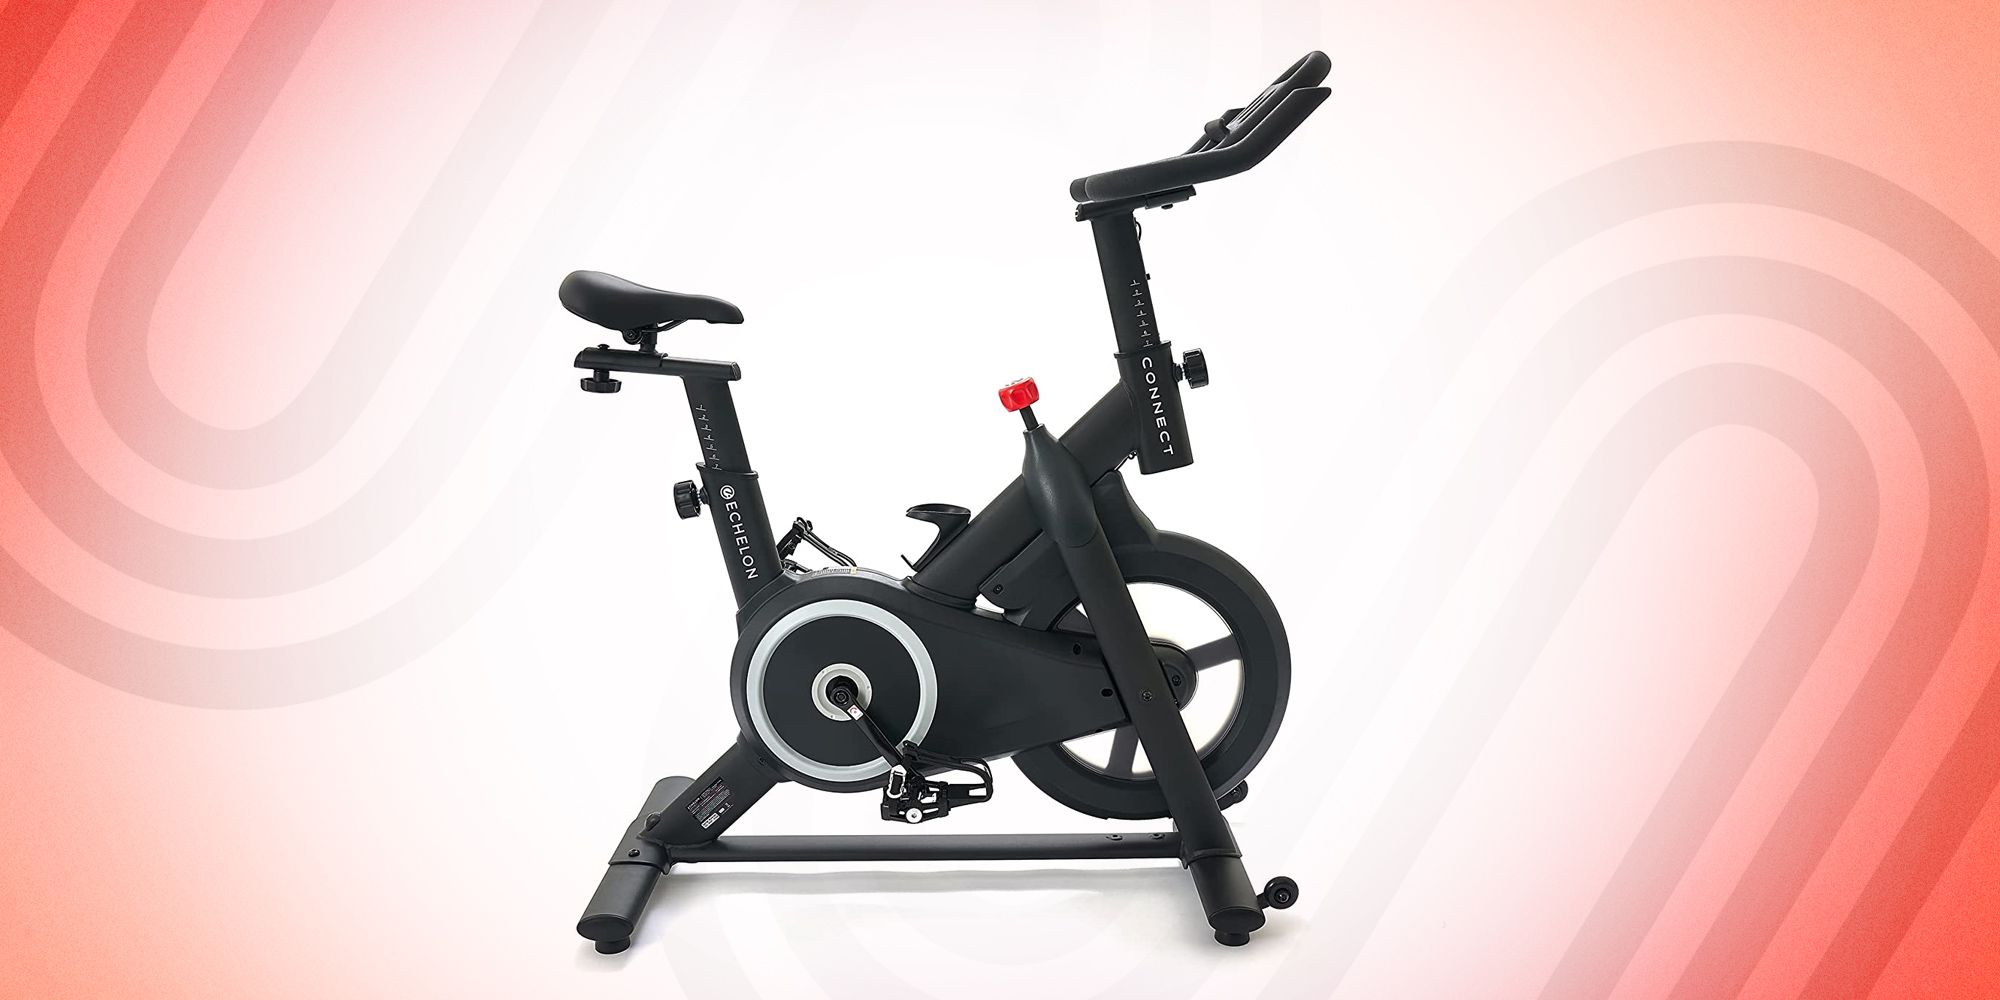 Indoor Exercise Bikes Cycling Spin Bike Bicycle Home Fitness Workout Cardio UK 